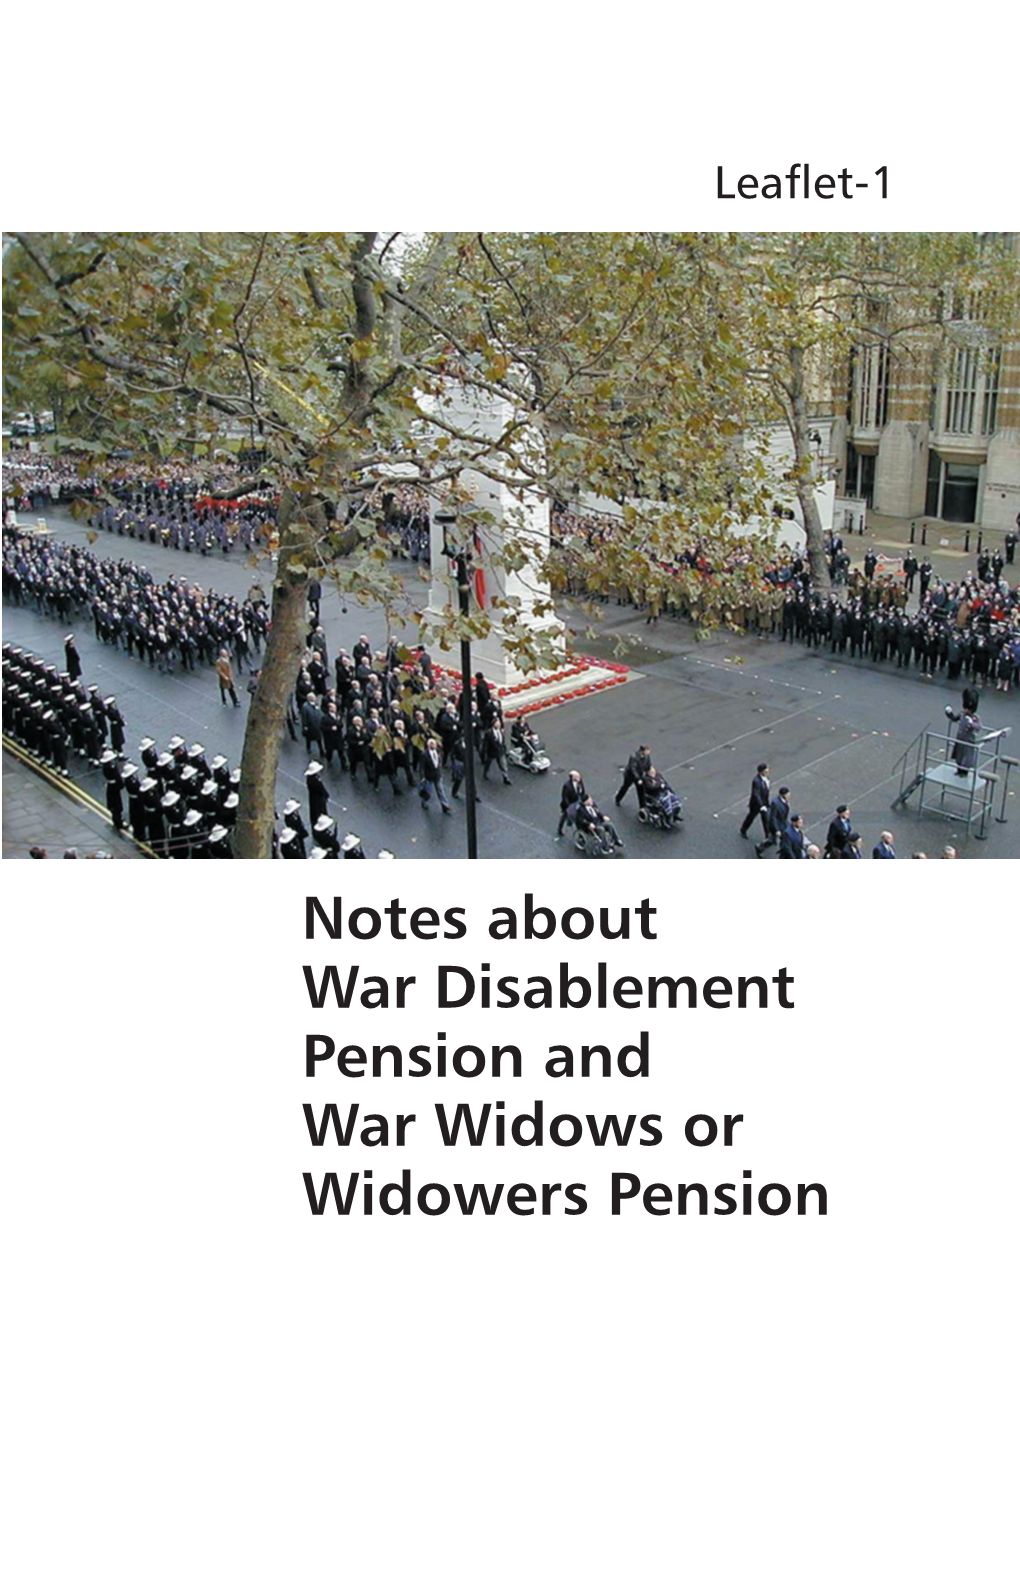 Notes About War Disablement Pension and War Widows Or Widowers Pension